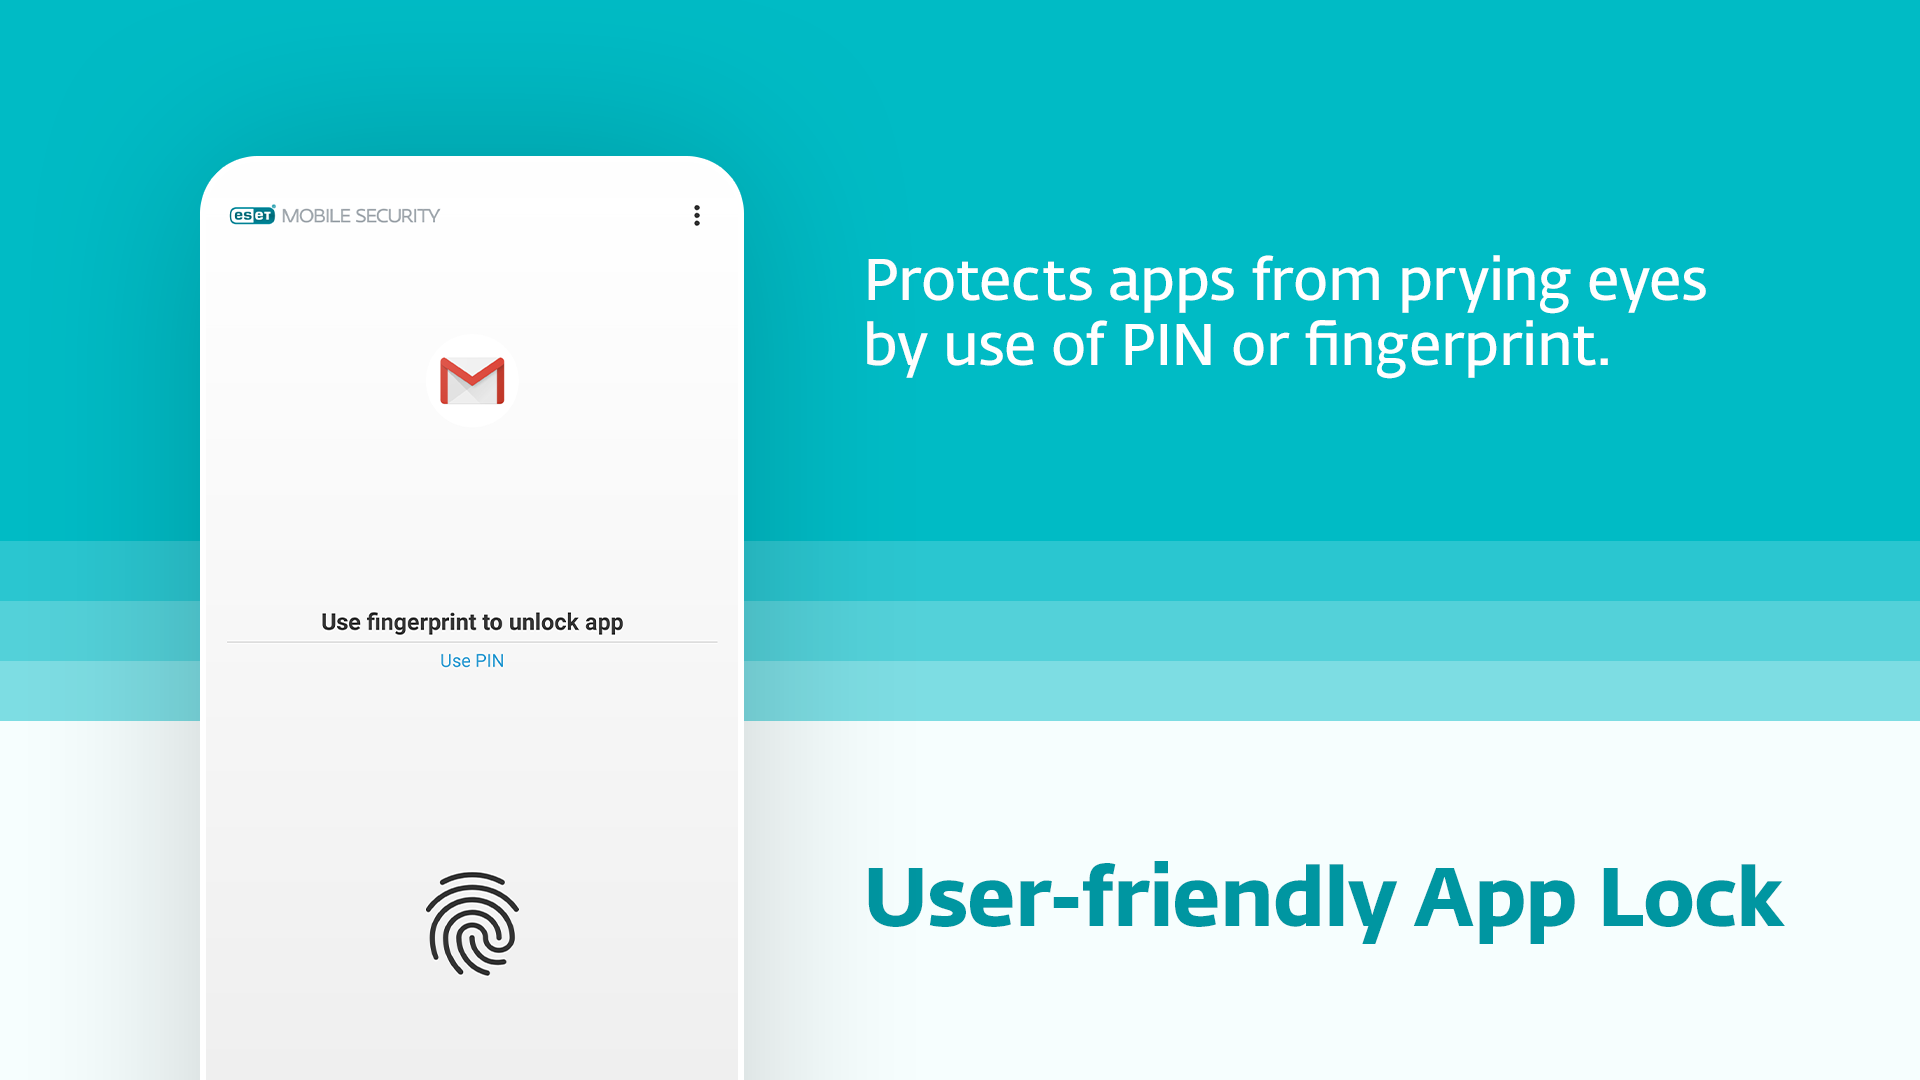 Scan your device for malware using a reputable antivirus app.
Opt for premium or ad-free versions of apps whenever possible.